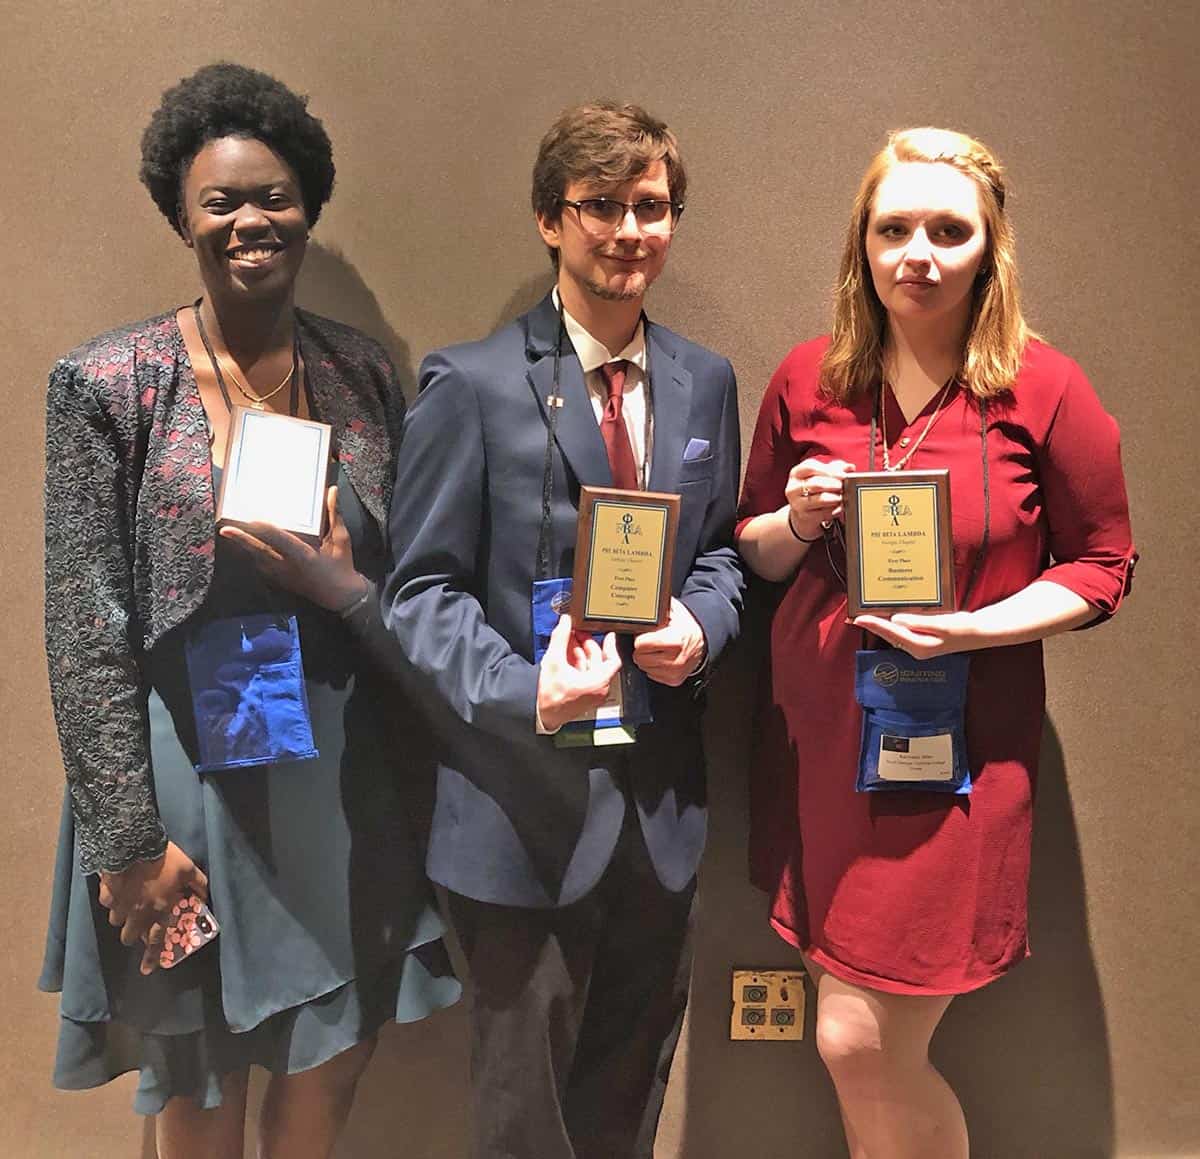 Shown above are the South Georgia Technical College Phi Beta Lambda state winners. They are Allysia Oliver, Christopher Mathews, and Kennedy Allen, all of Vienna, and they will represent the South Georgia Tech Crisp County Center PBL organization at the national competition in Texas in June.